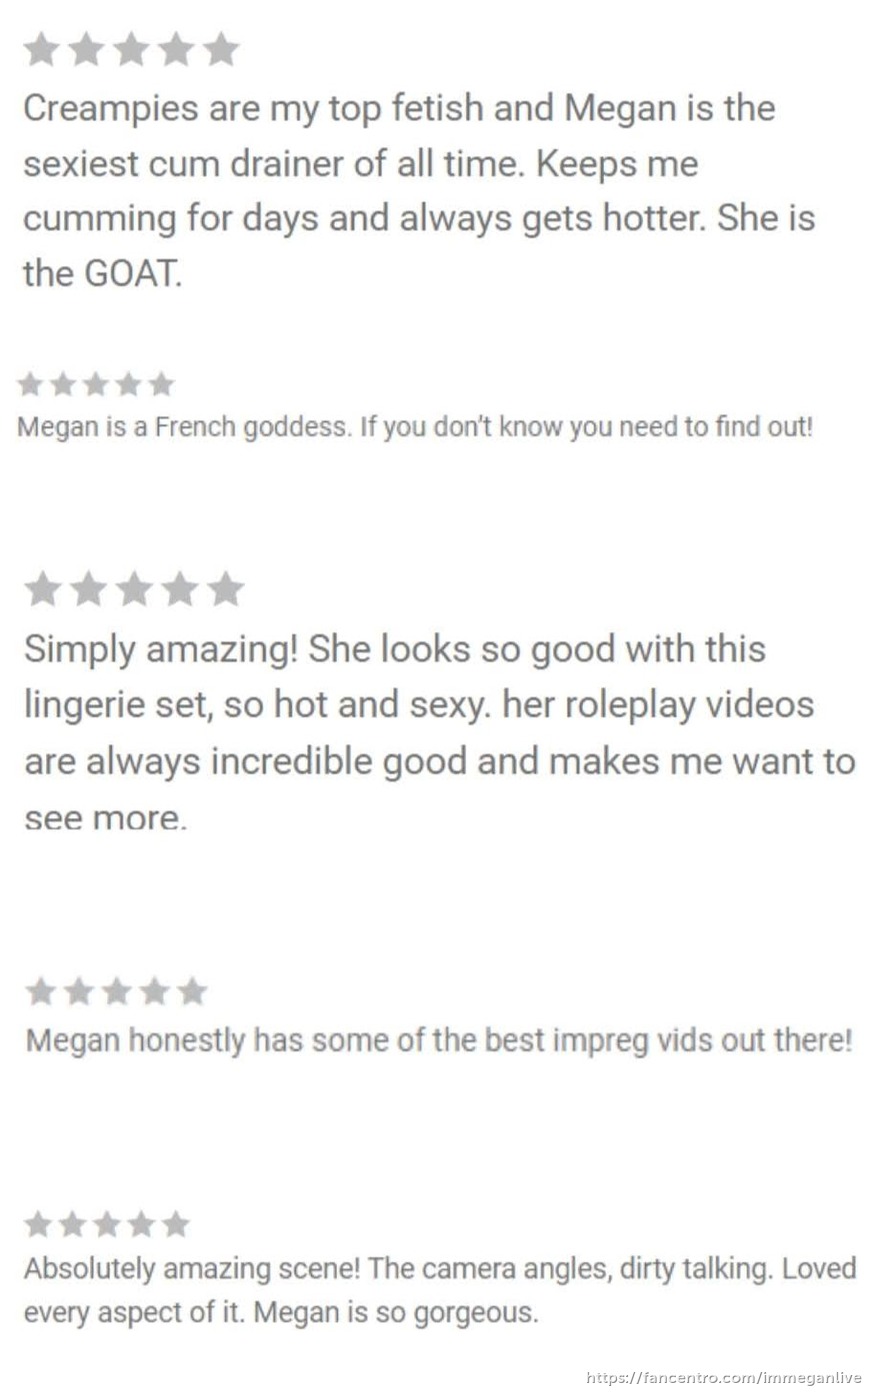 Some of your reviews after watching the exclusive videos 💦